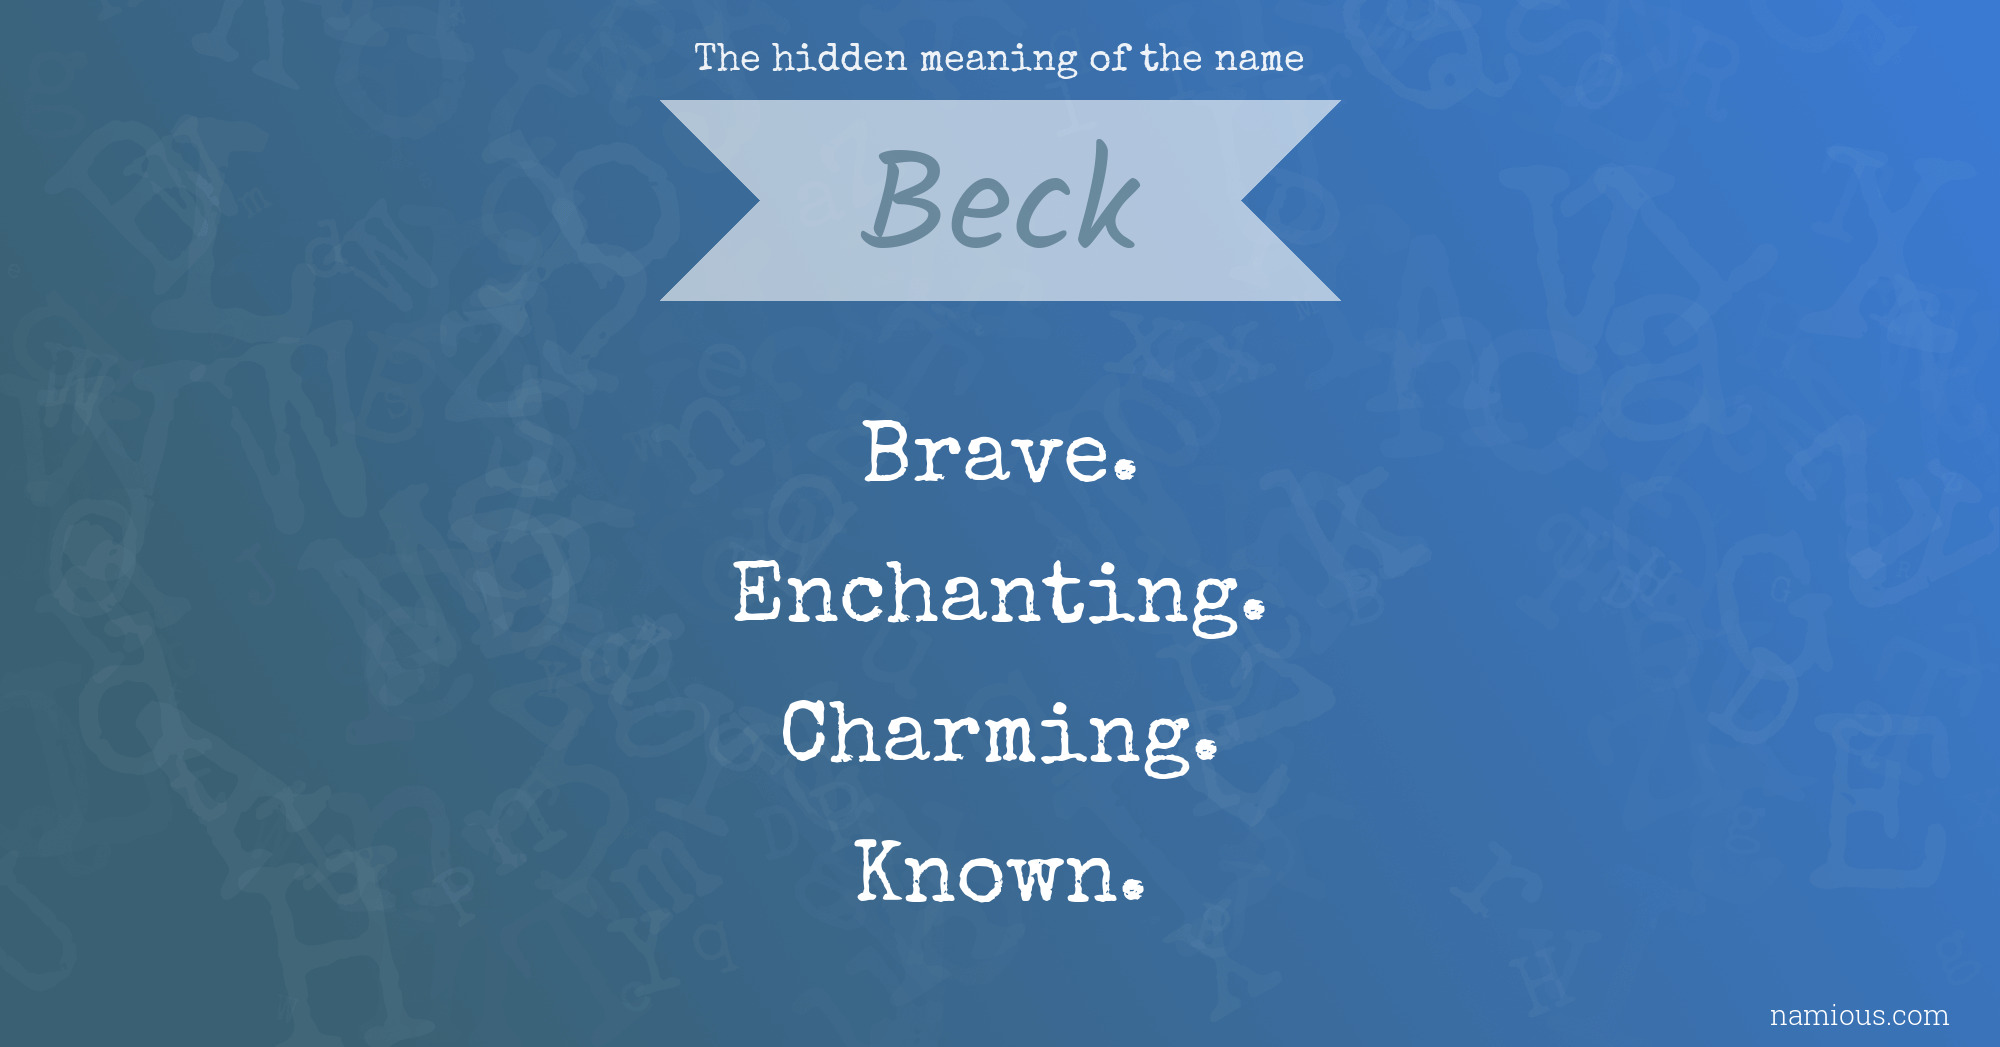 The hidden meaning of the name Beck